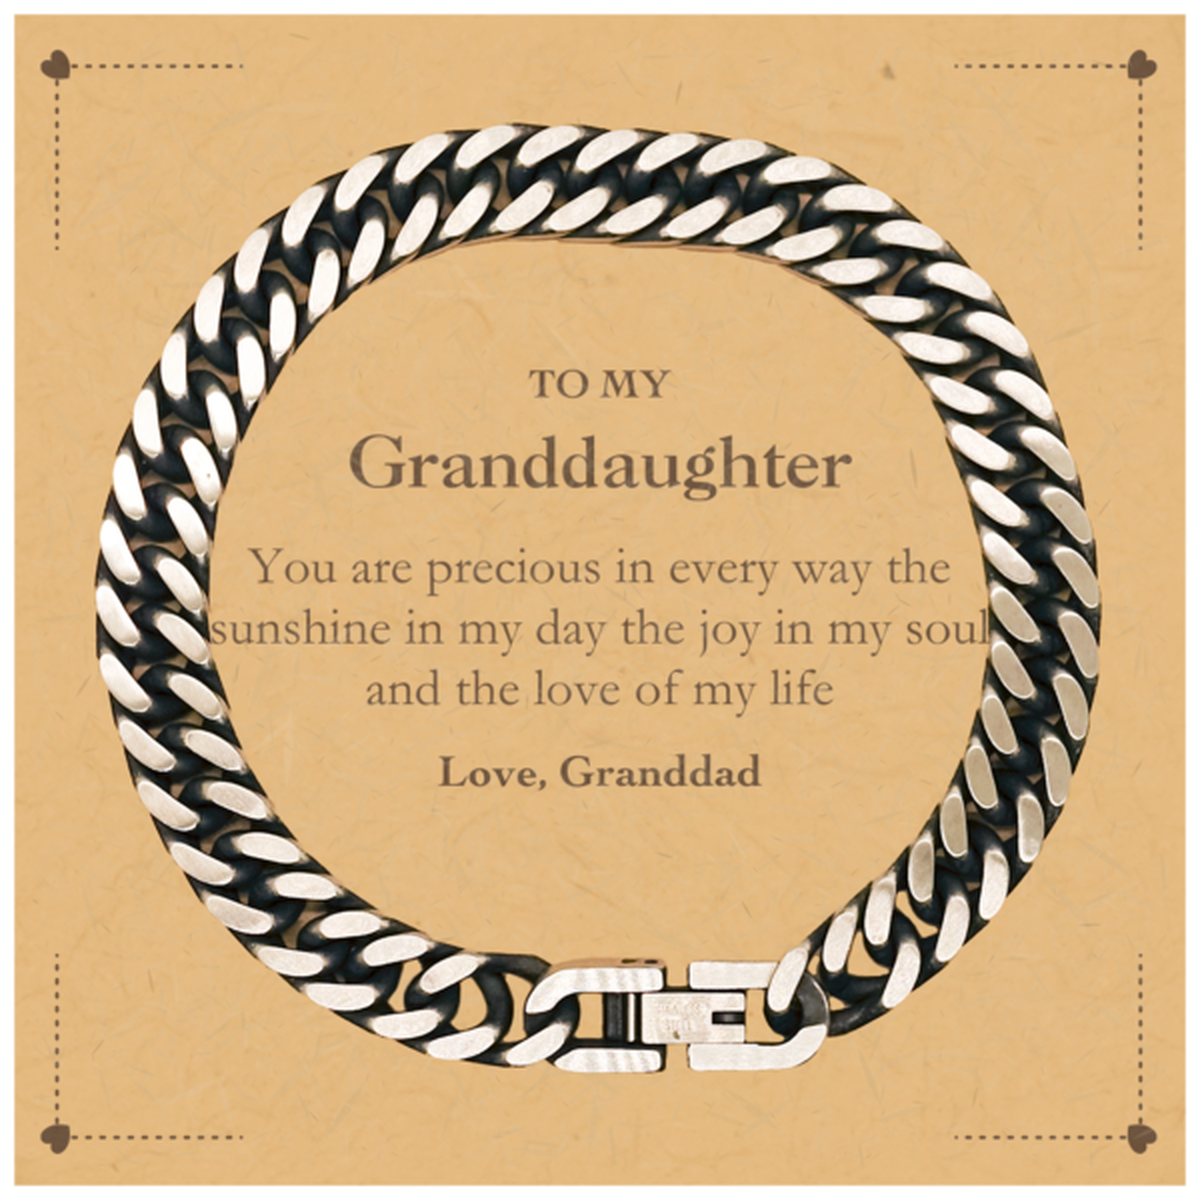 Graduation Gifts for Granddaughter Cuban Link Chain Bracelet Present from Granddad, Christmas Granddaughter Birthday Gifts Granddaughter You are precious in every way the sunshine in my day. Love, Granddad